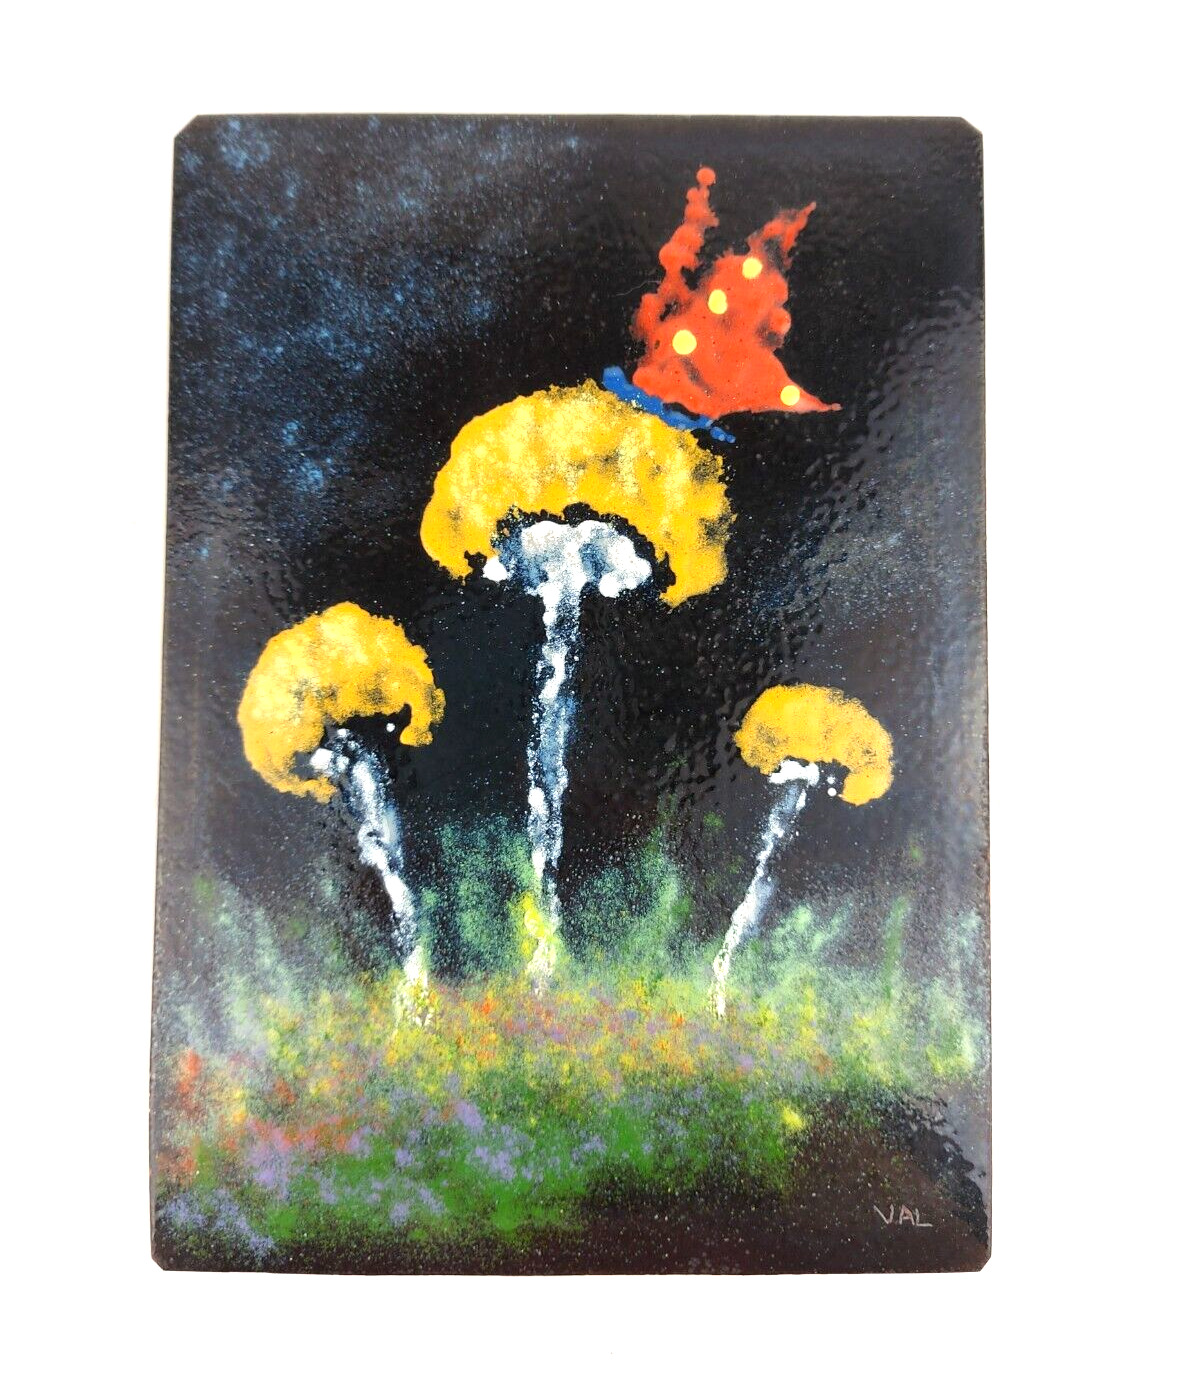 OOAK Signed Yellow Mushrooms Butterfly Painted Art on Metal Sheet 7\